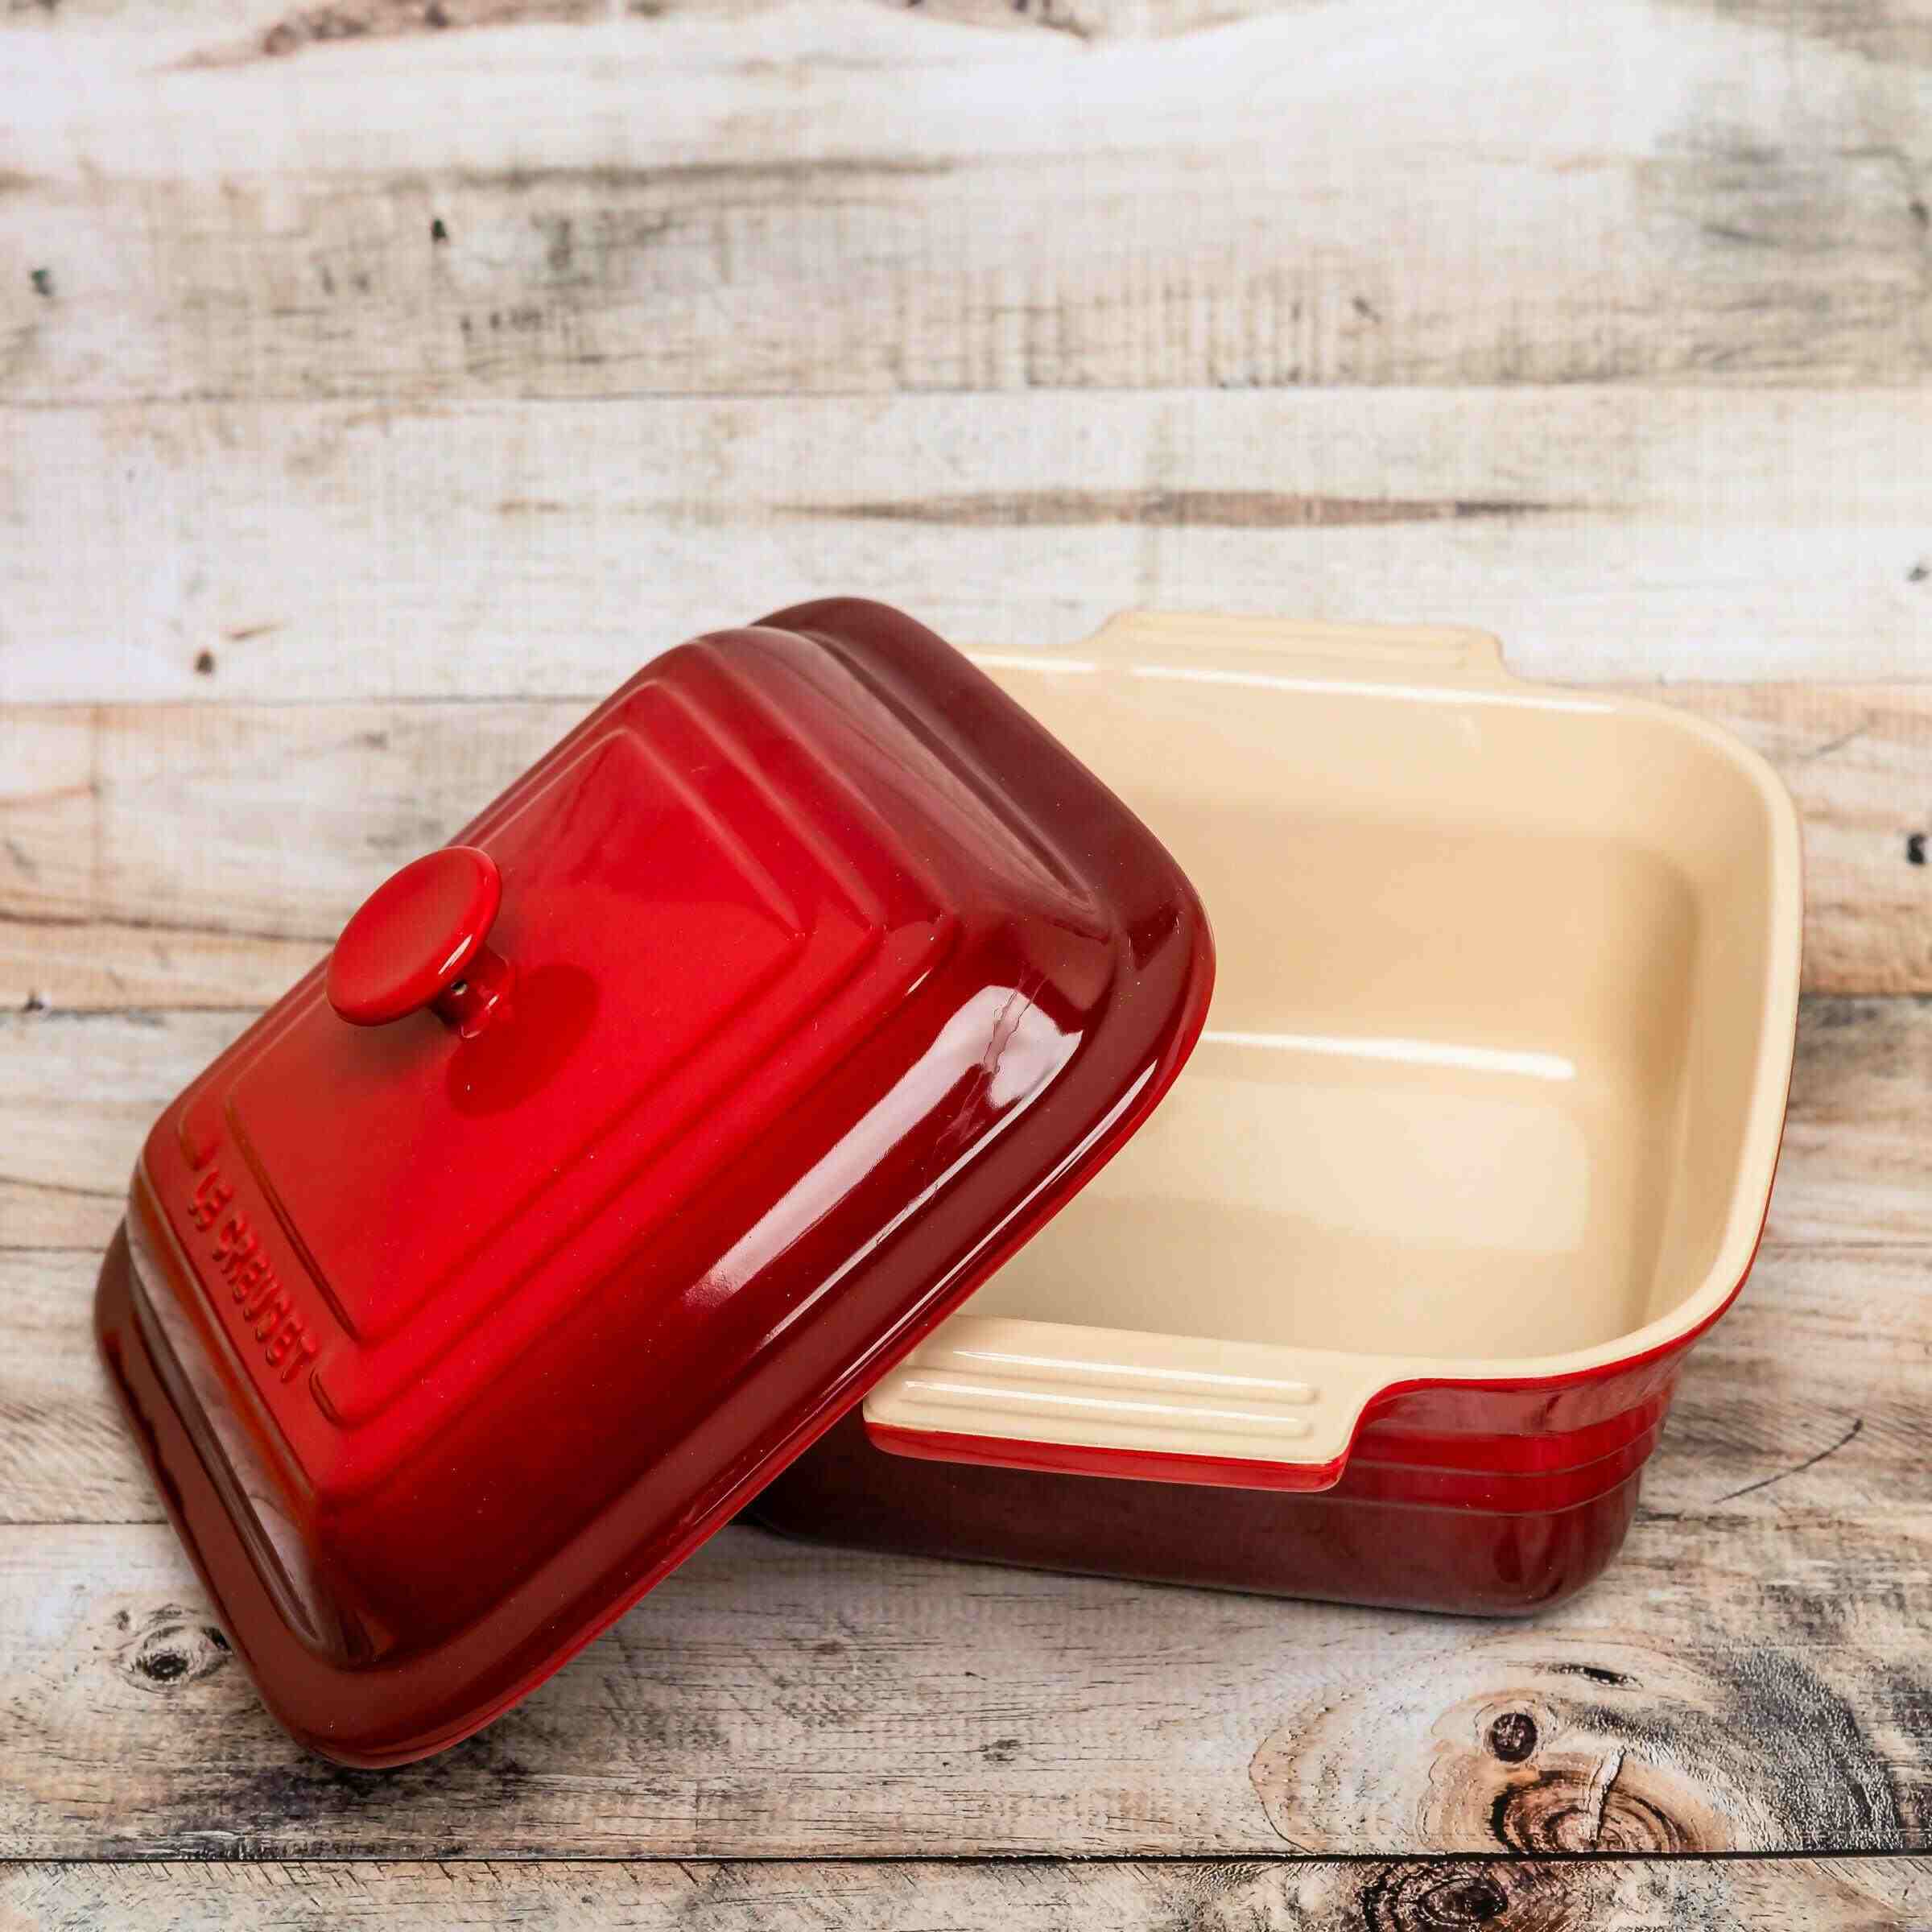 Pre-owned, gently used cerise Le Creuset Stoneware 3 Quart Square Casserole Dish With Lid, lid off to side